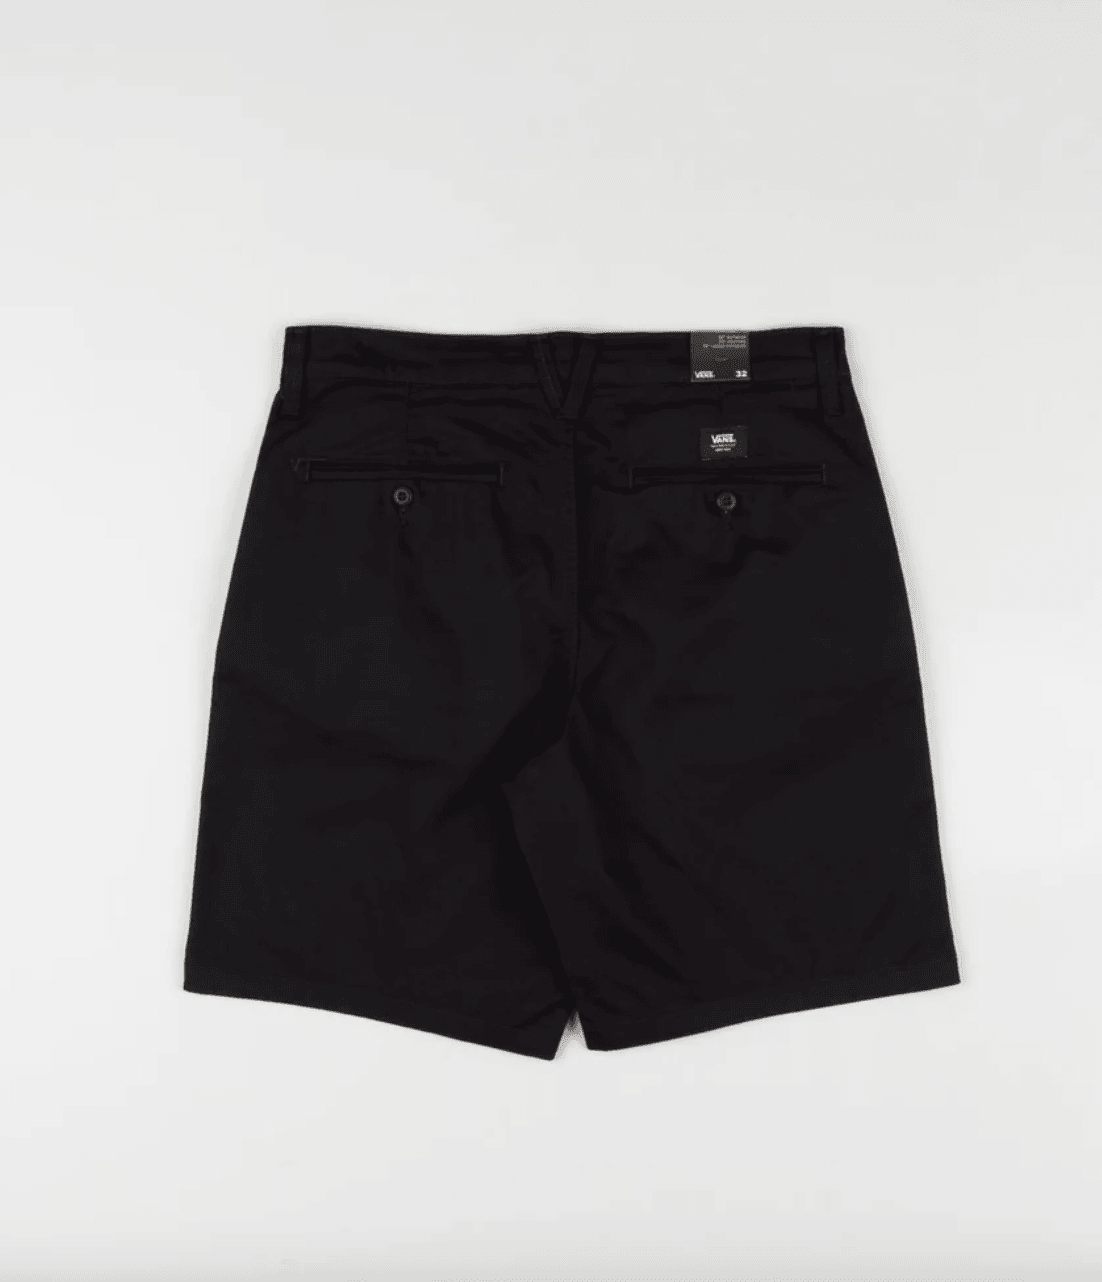 MN AUTHENTIC CHINO RELAXED SHORT - VN0A5FJXBLK1